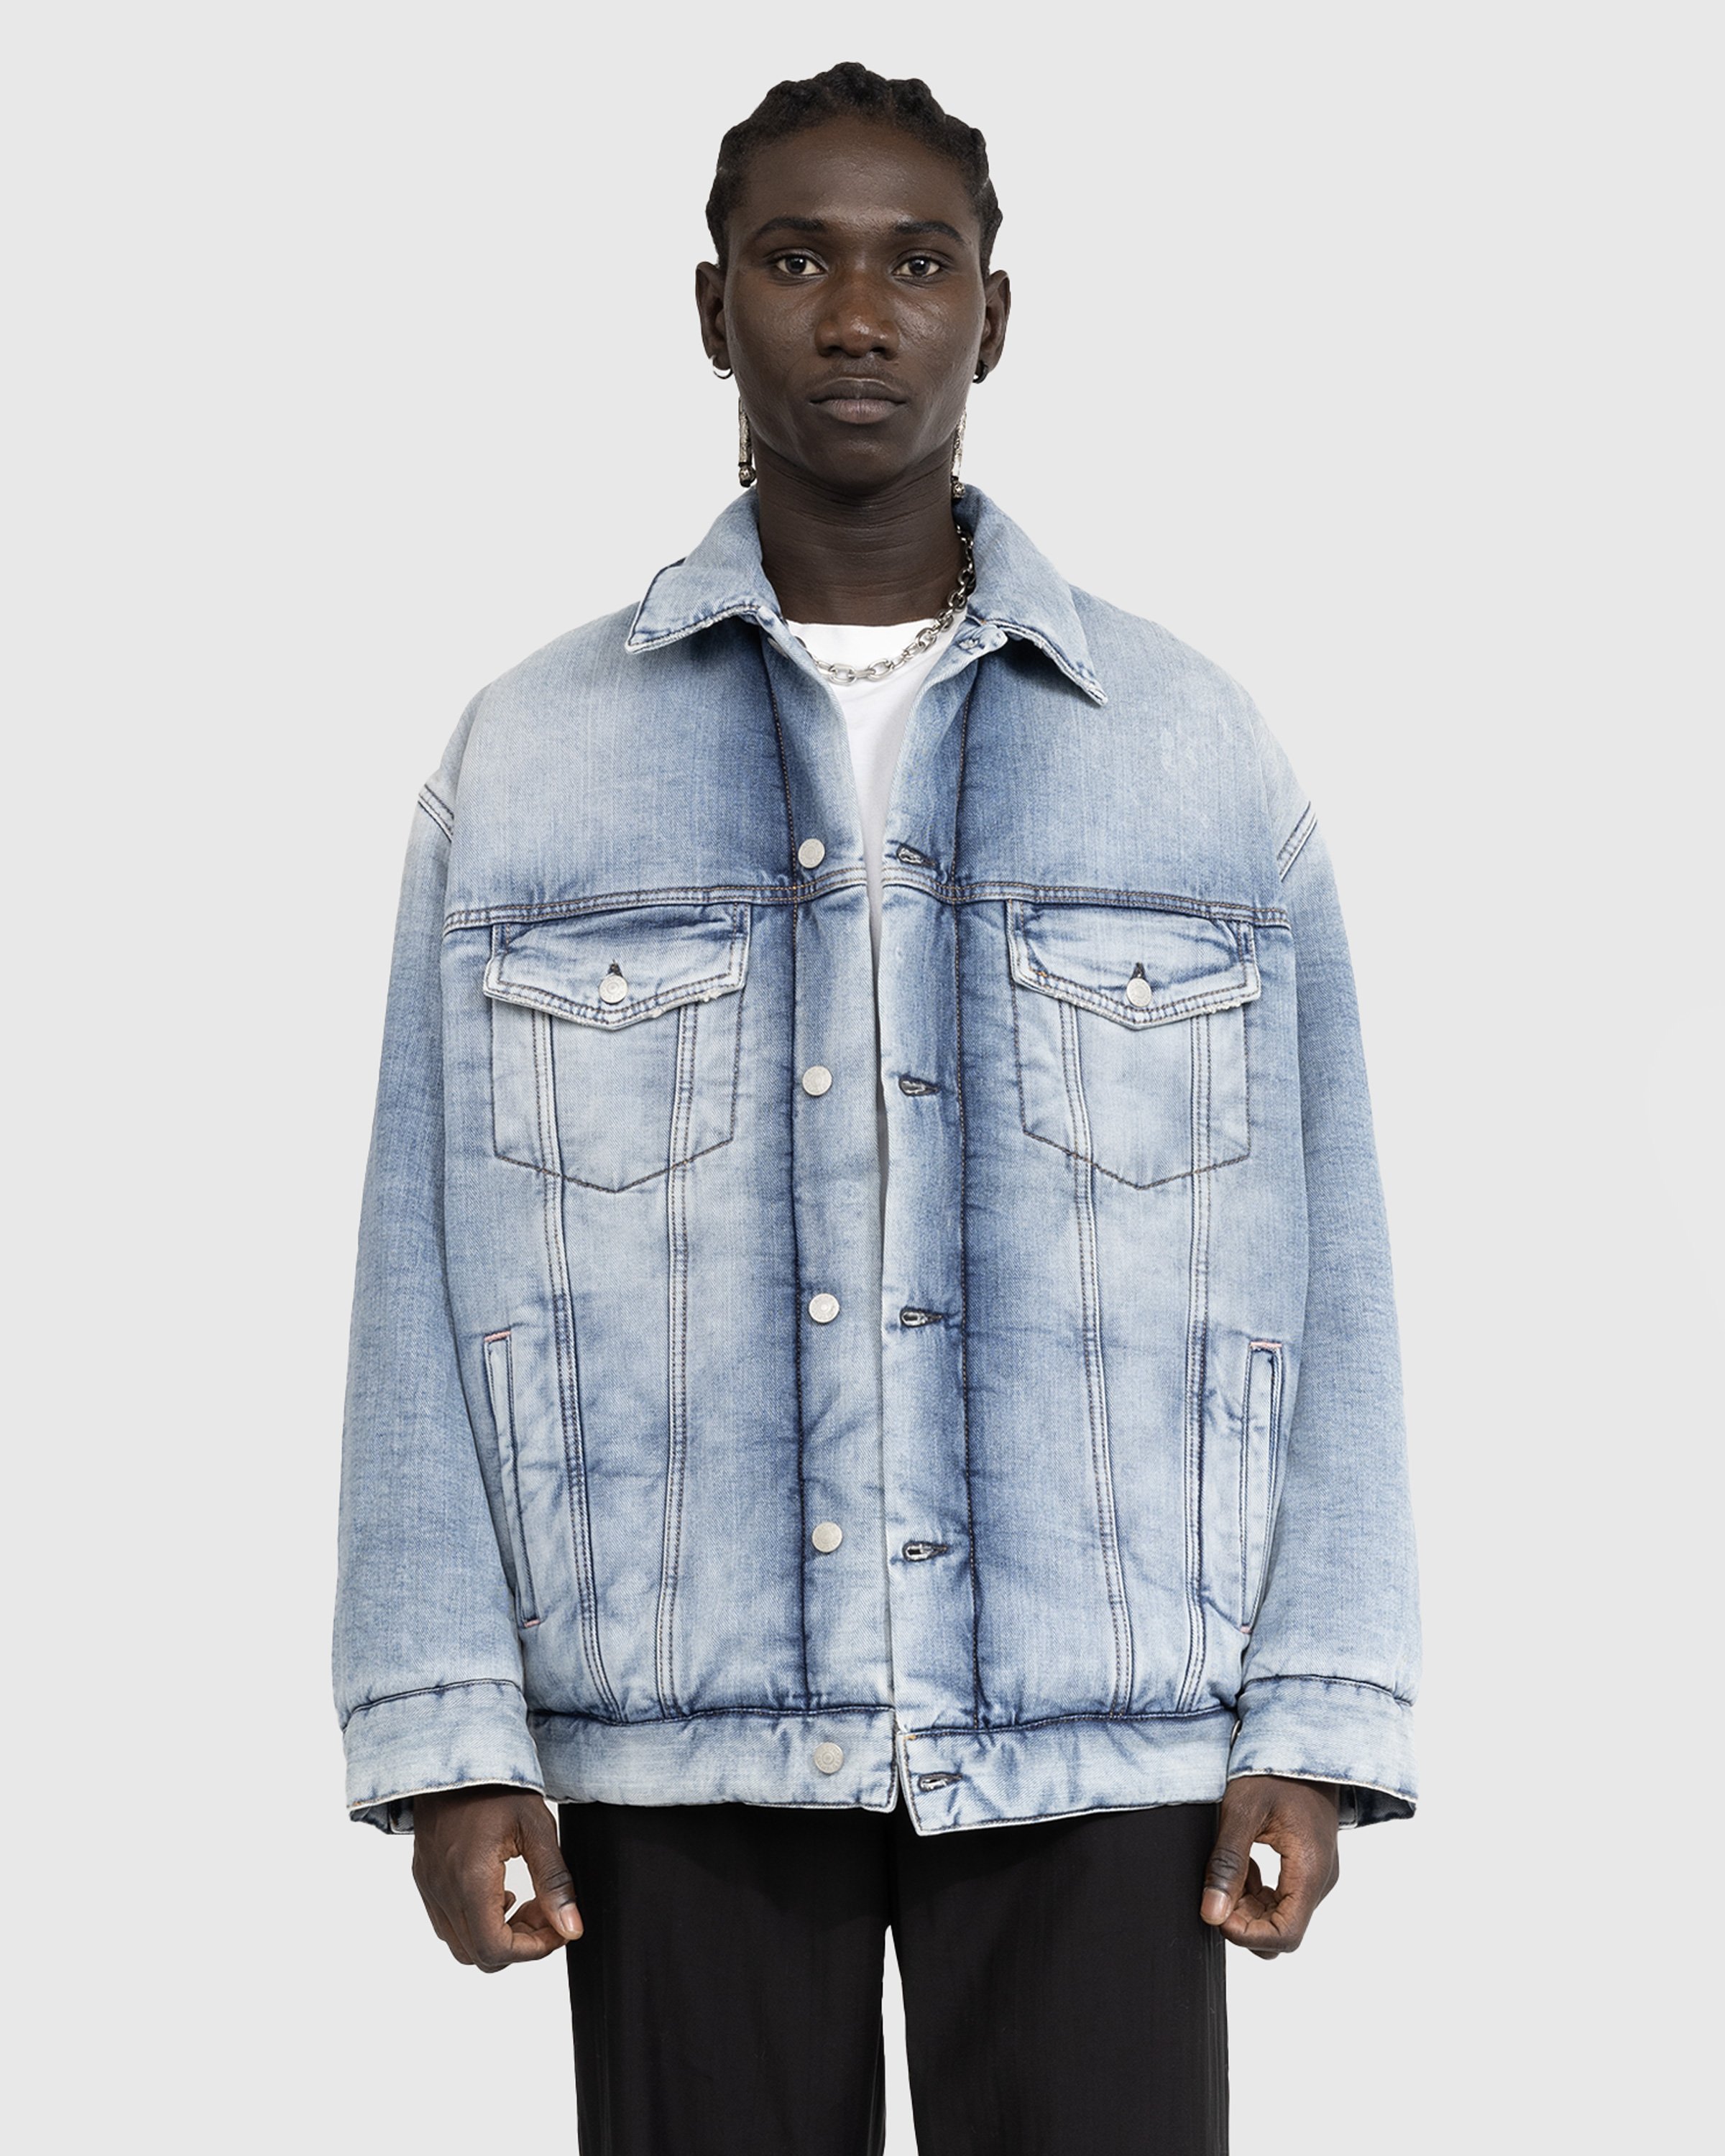 Acne Studios - FN-UX-OUTW000025 - Clothing - Blue - Image 2